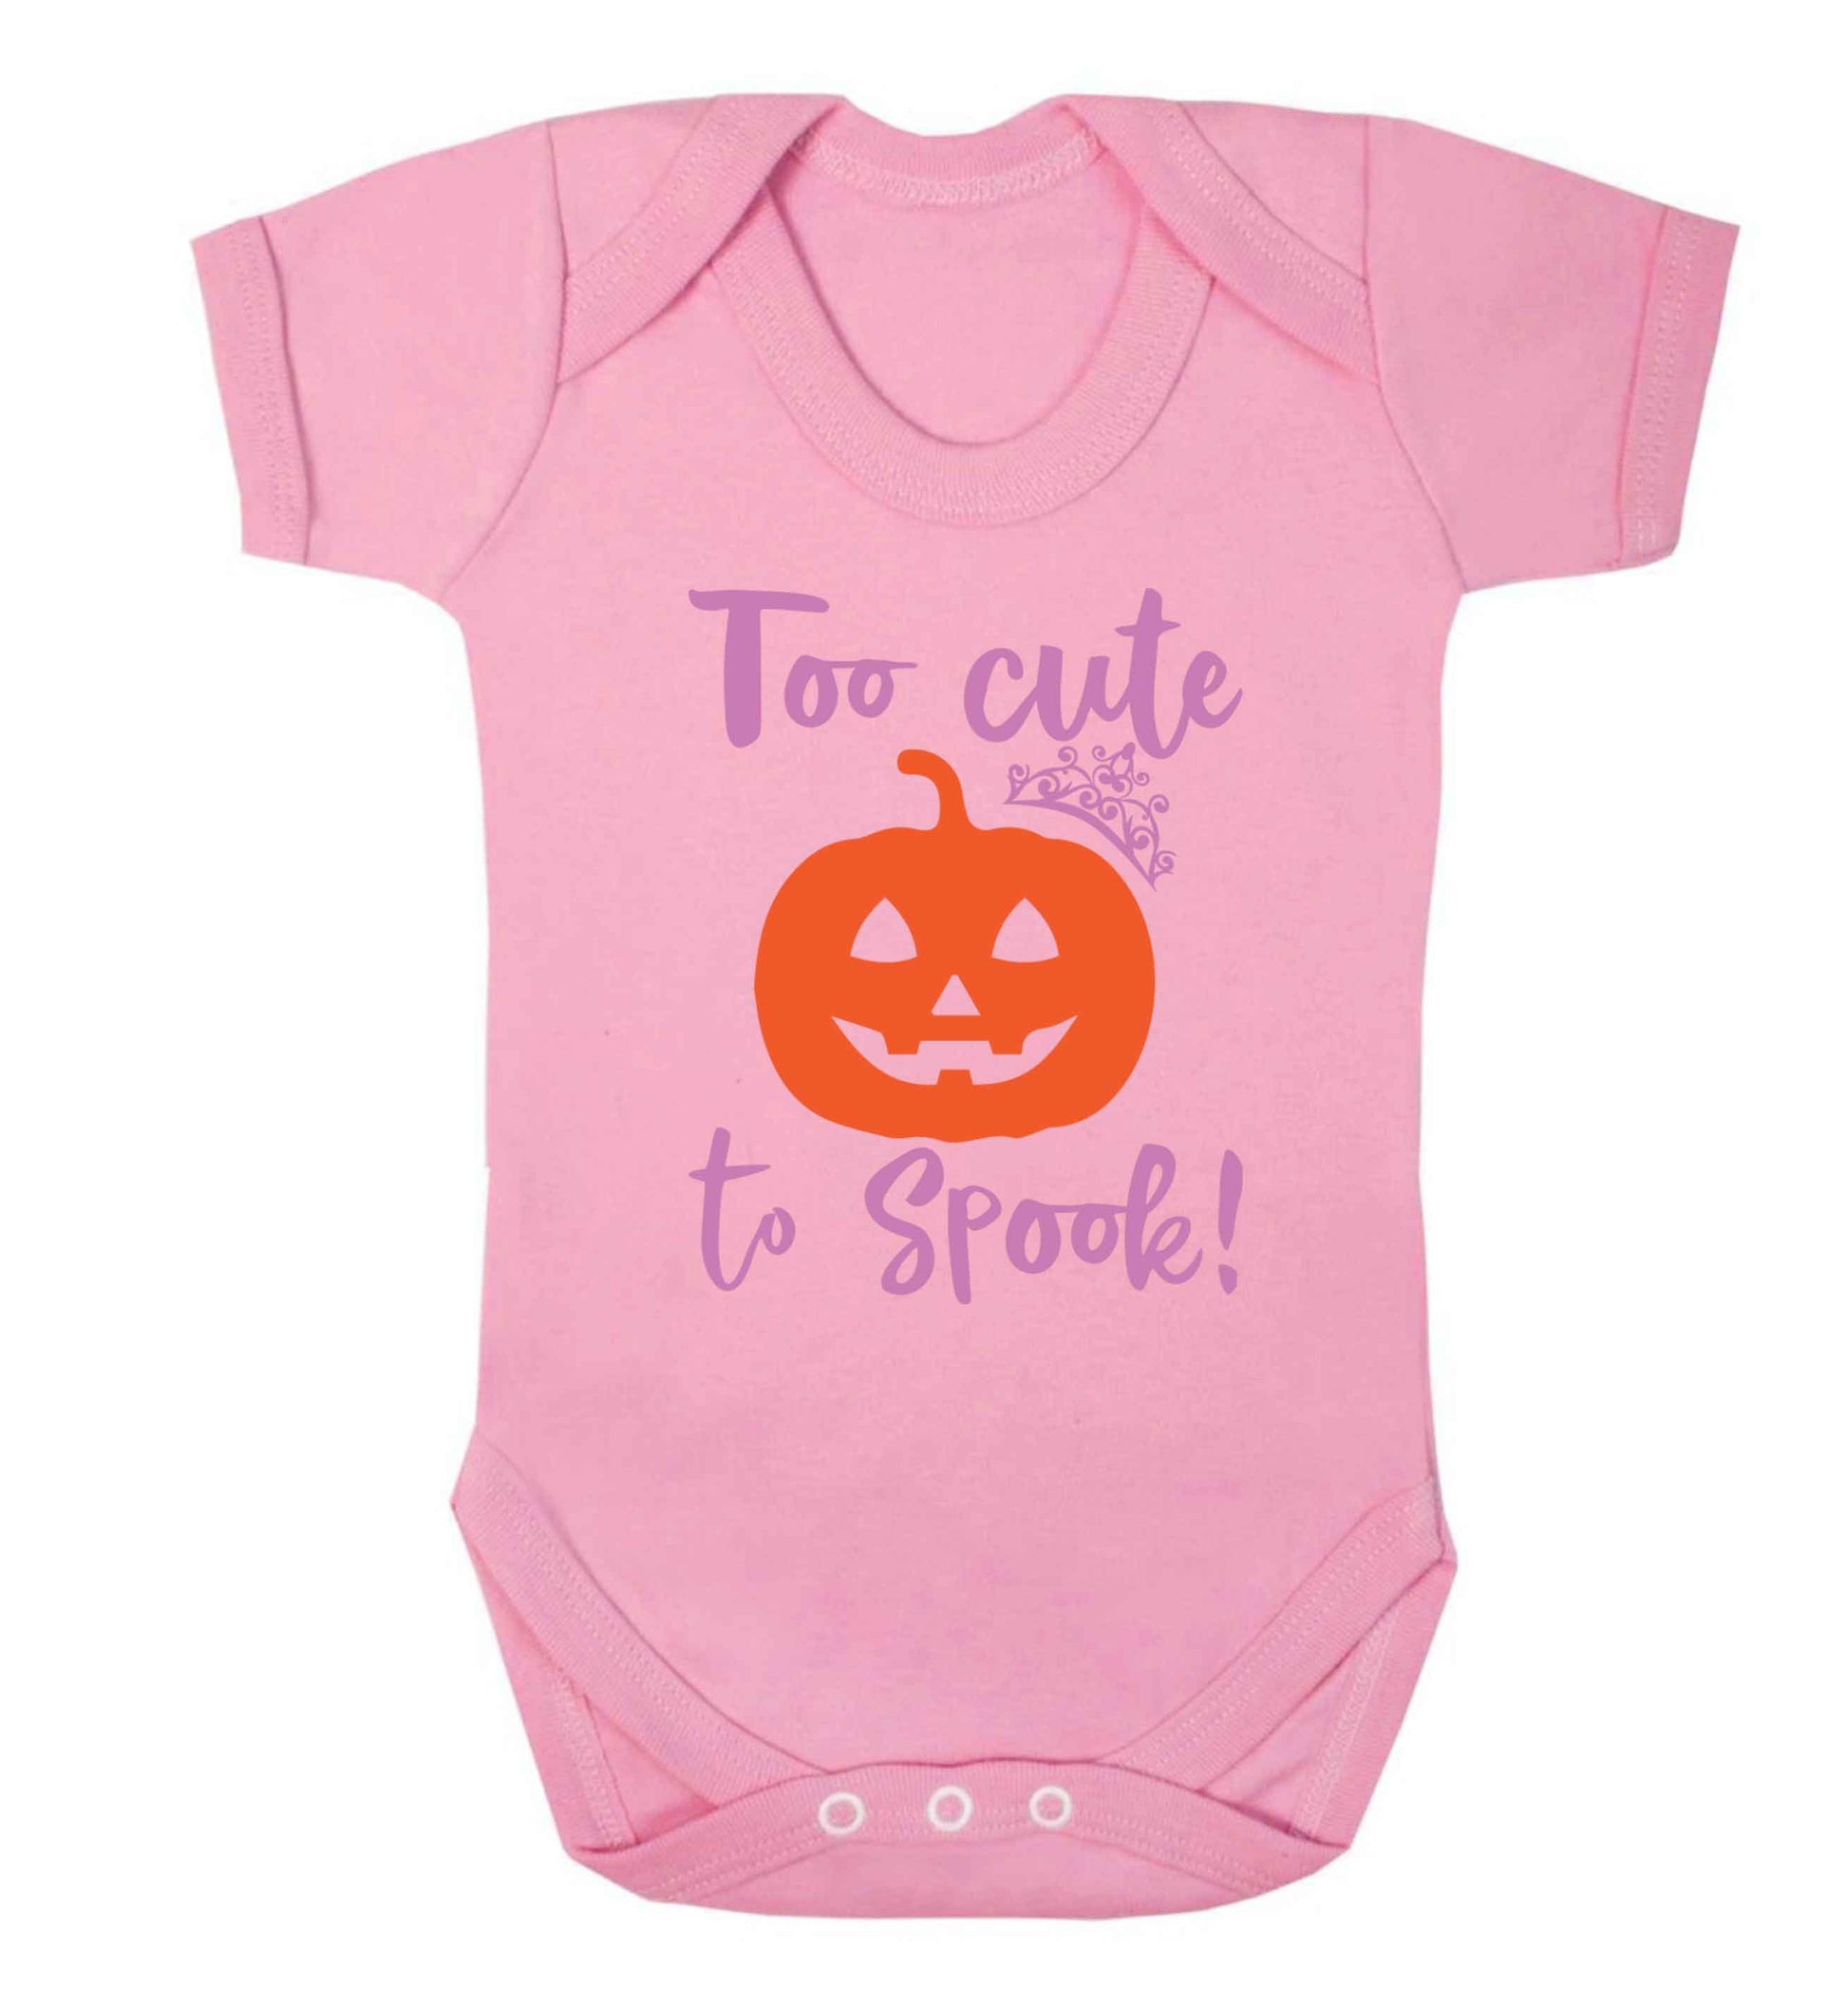 Too cute to spook! Baby Vest pale pink 18-24 months